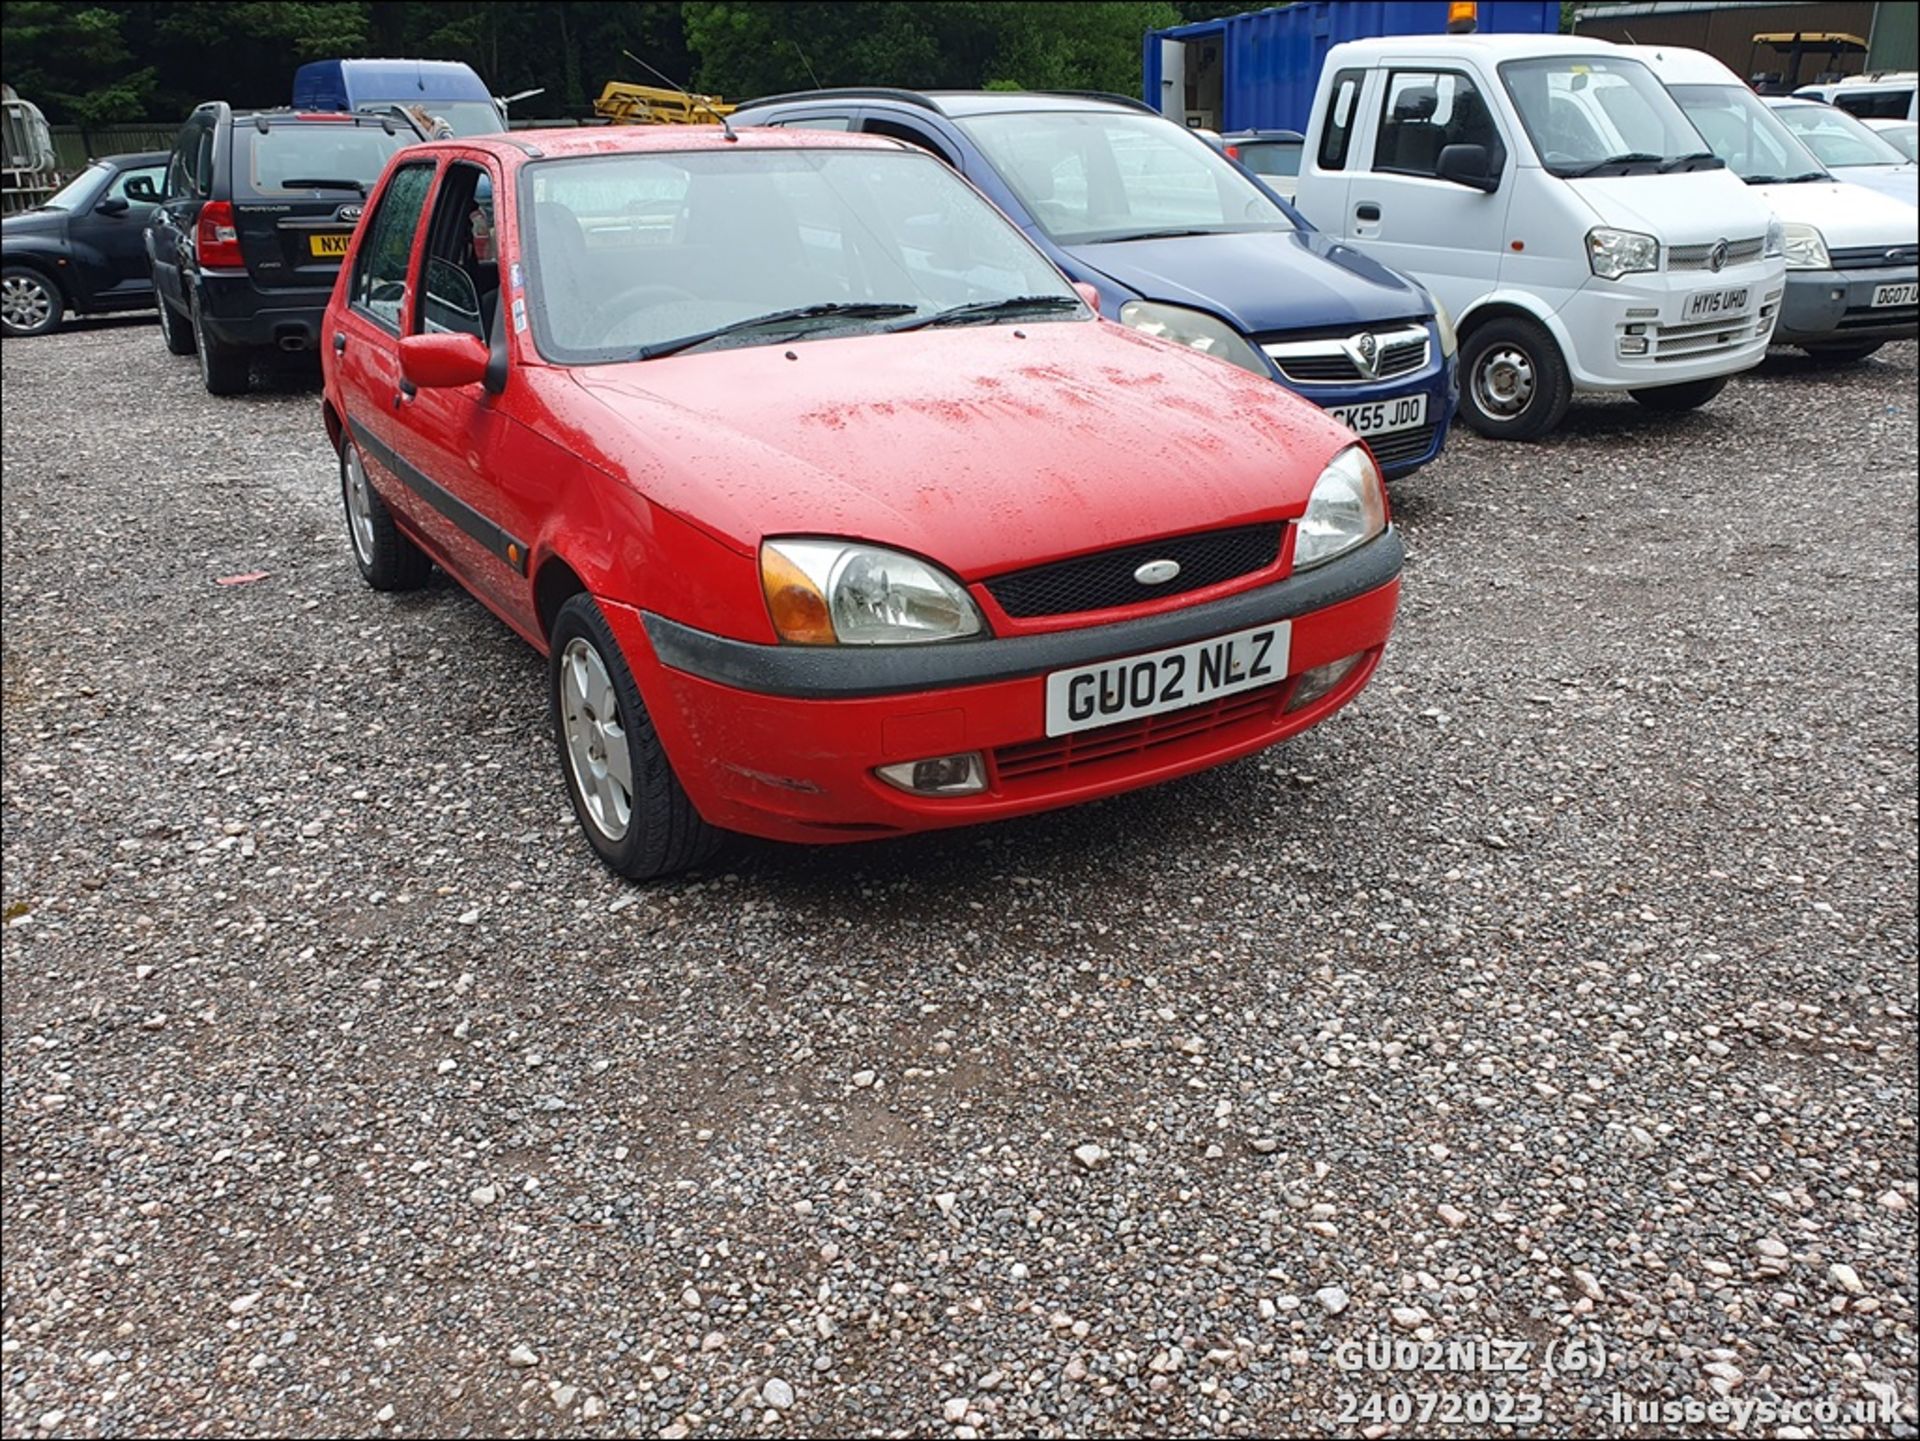 02/02 FORD FIESTA FREESTYLE - 1242cc 3dr Hatchback (Red) - Image 6 of 42